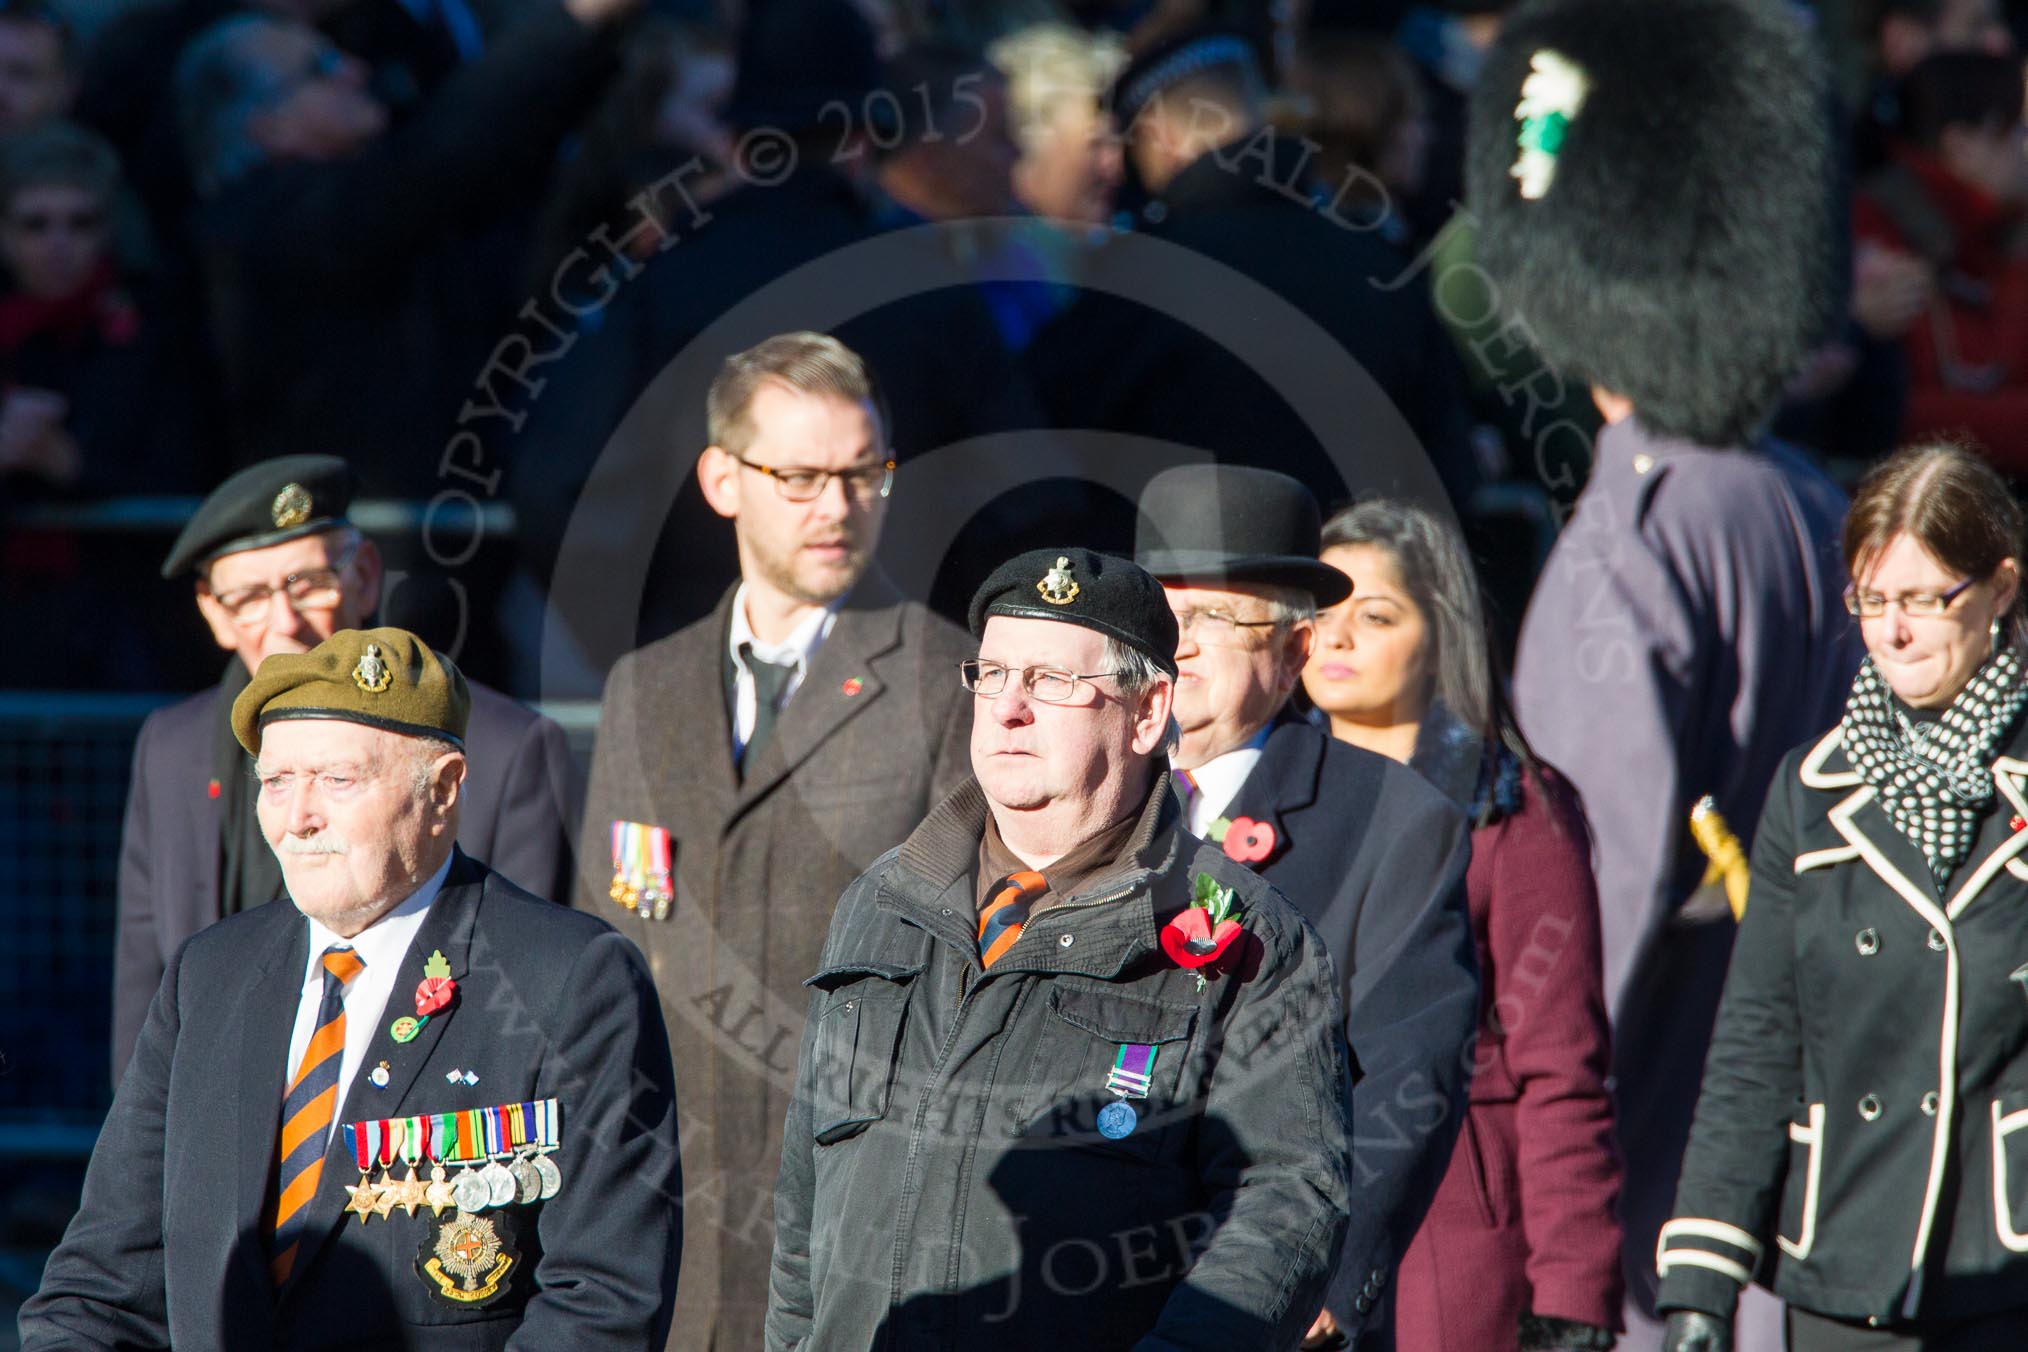 Remembrance Sunday Cenotaph March Past 2013: A33 - Royal Sussex Regimental Association..
Press stand opposite the Foreign Office building, Whitehall, London SW1,
London,
Greater London,
United Kingdom,
on 10 November 2013 at 11:58, image #1294